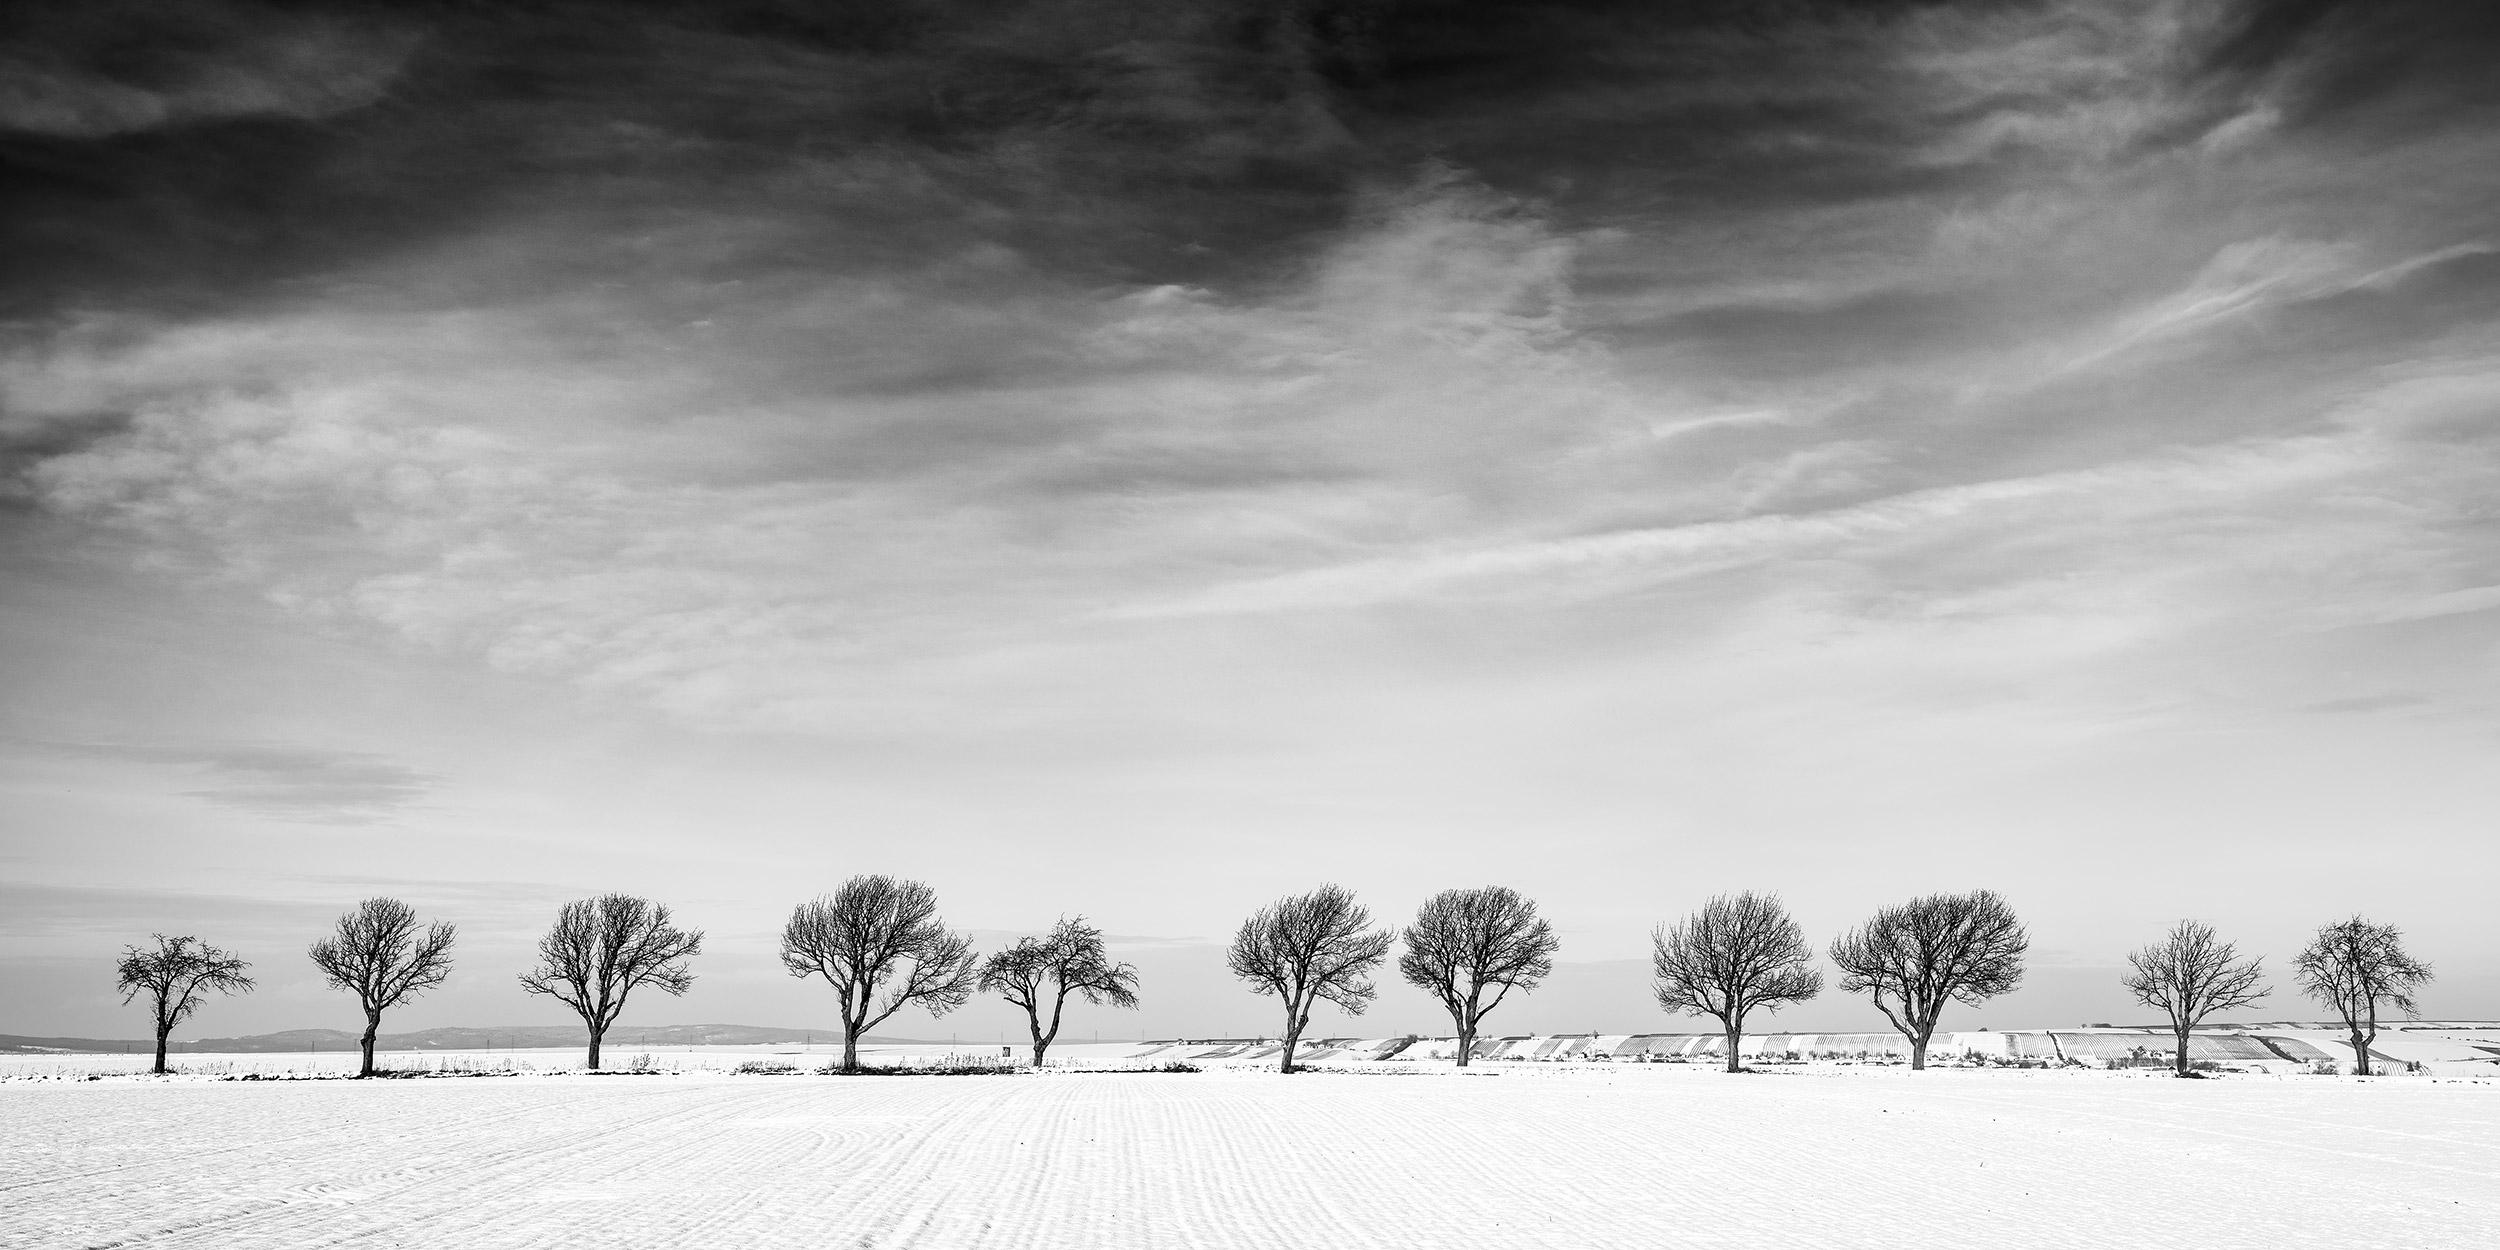 Gerald Berghammer Landscape Photograph - Eleven Trees in the snow Field, Austria, black and white photography, landscape